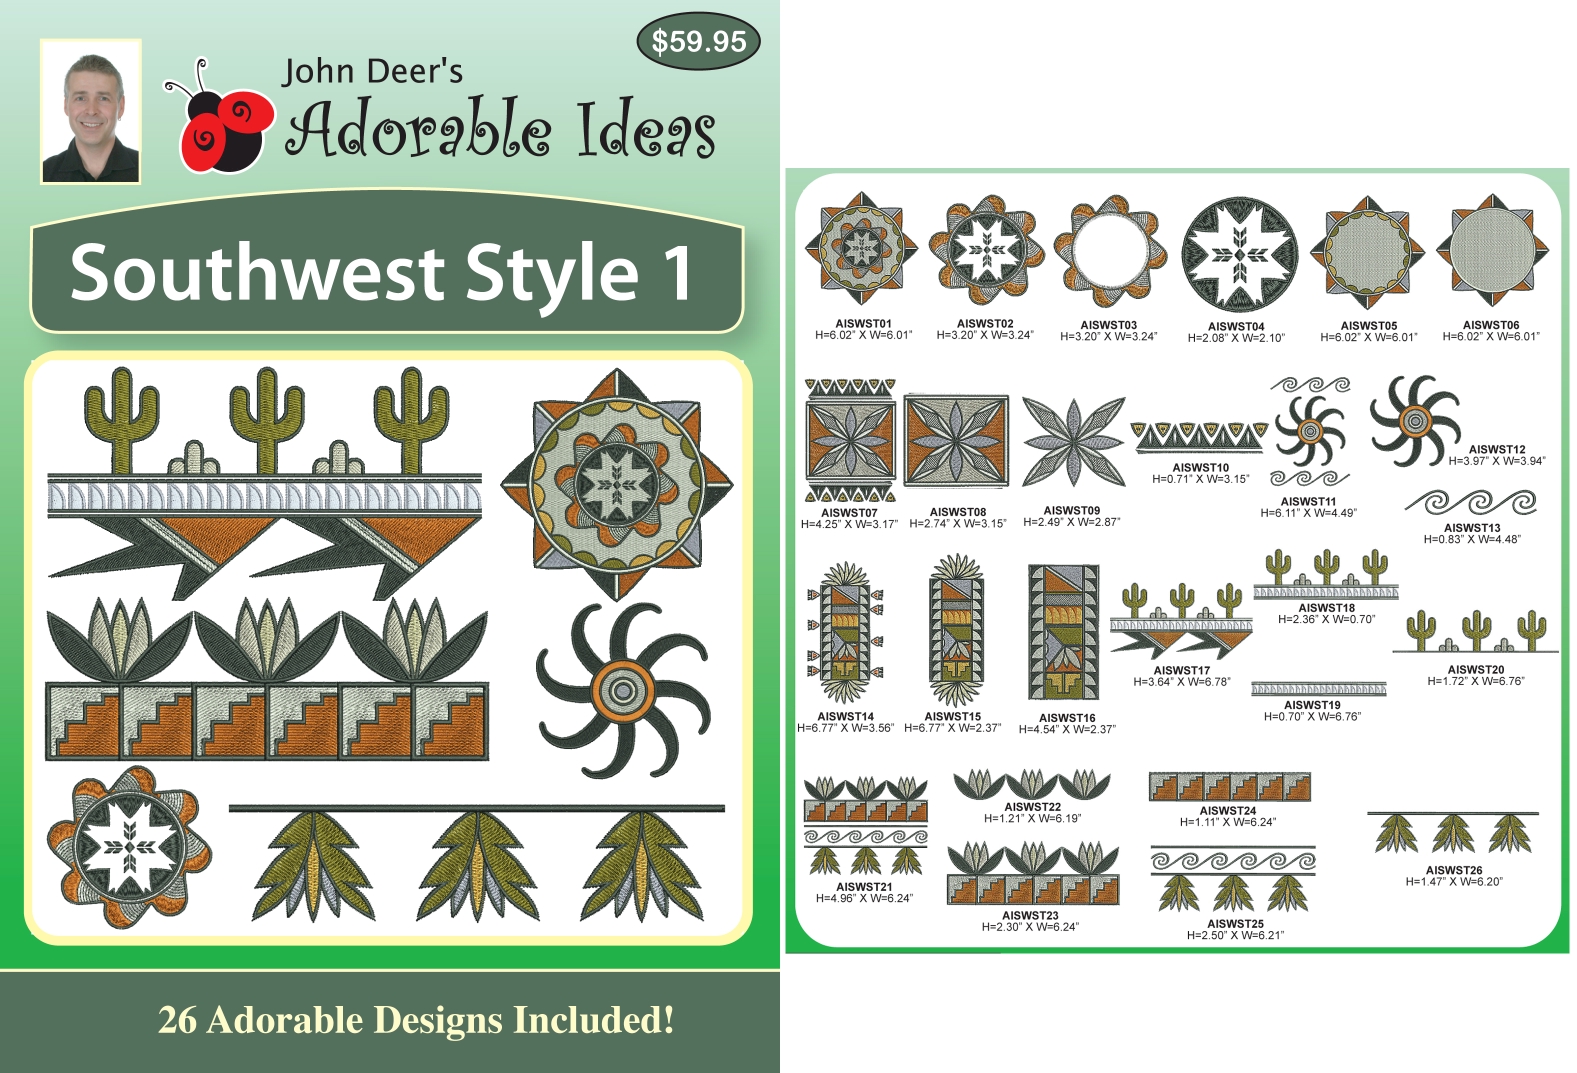 Southwest Style 1 Embroidery Designs by John Deer's Adorable Ideas - Multi-Format CD-ROM